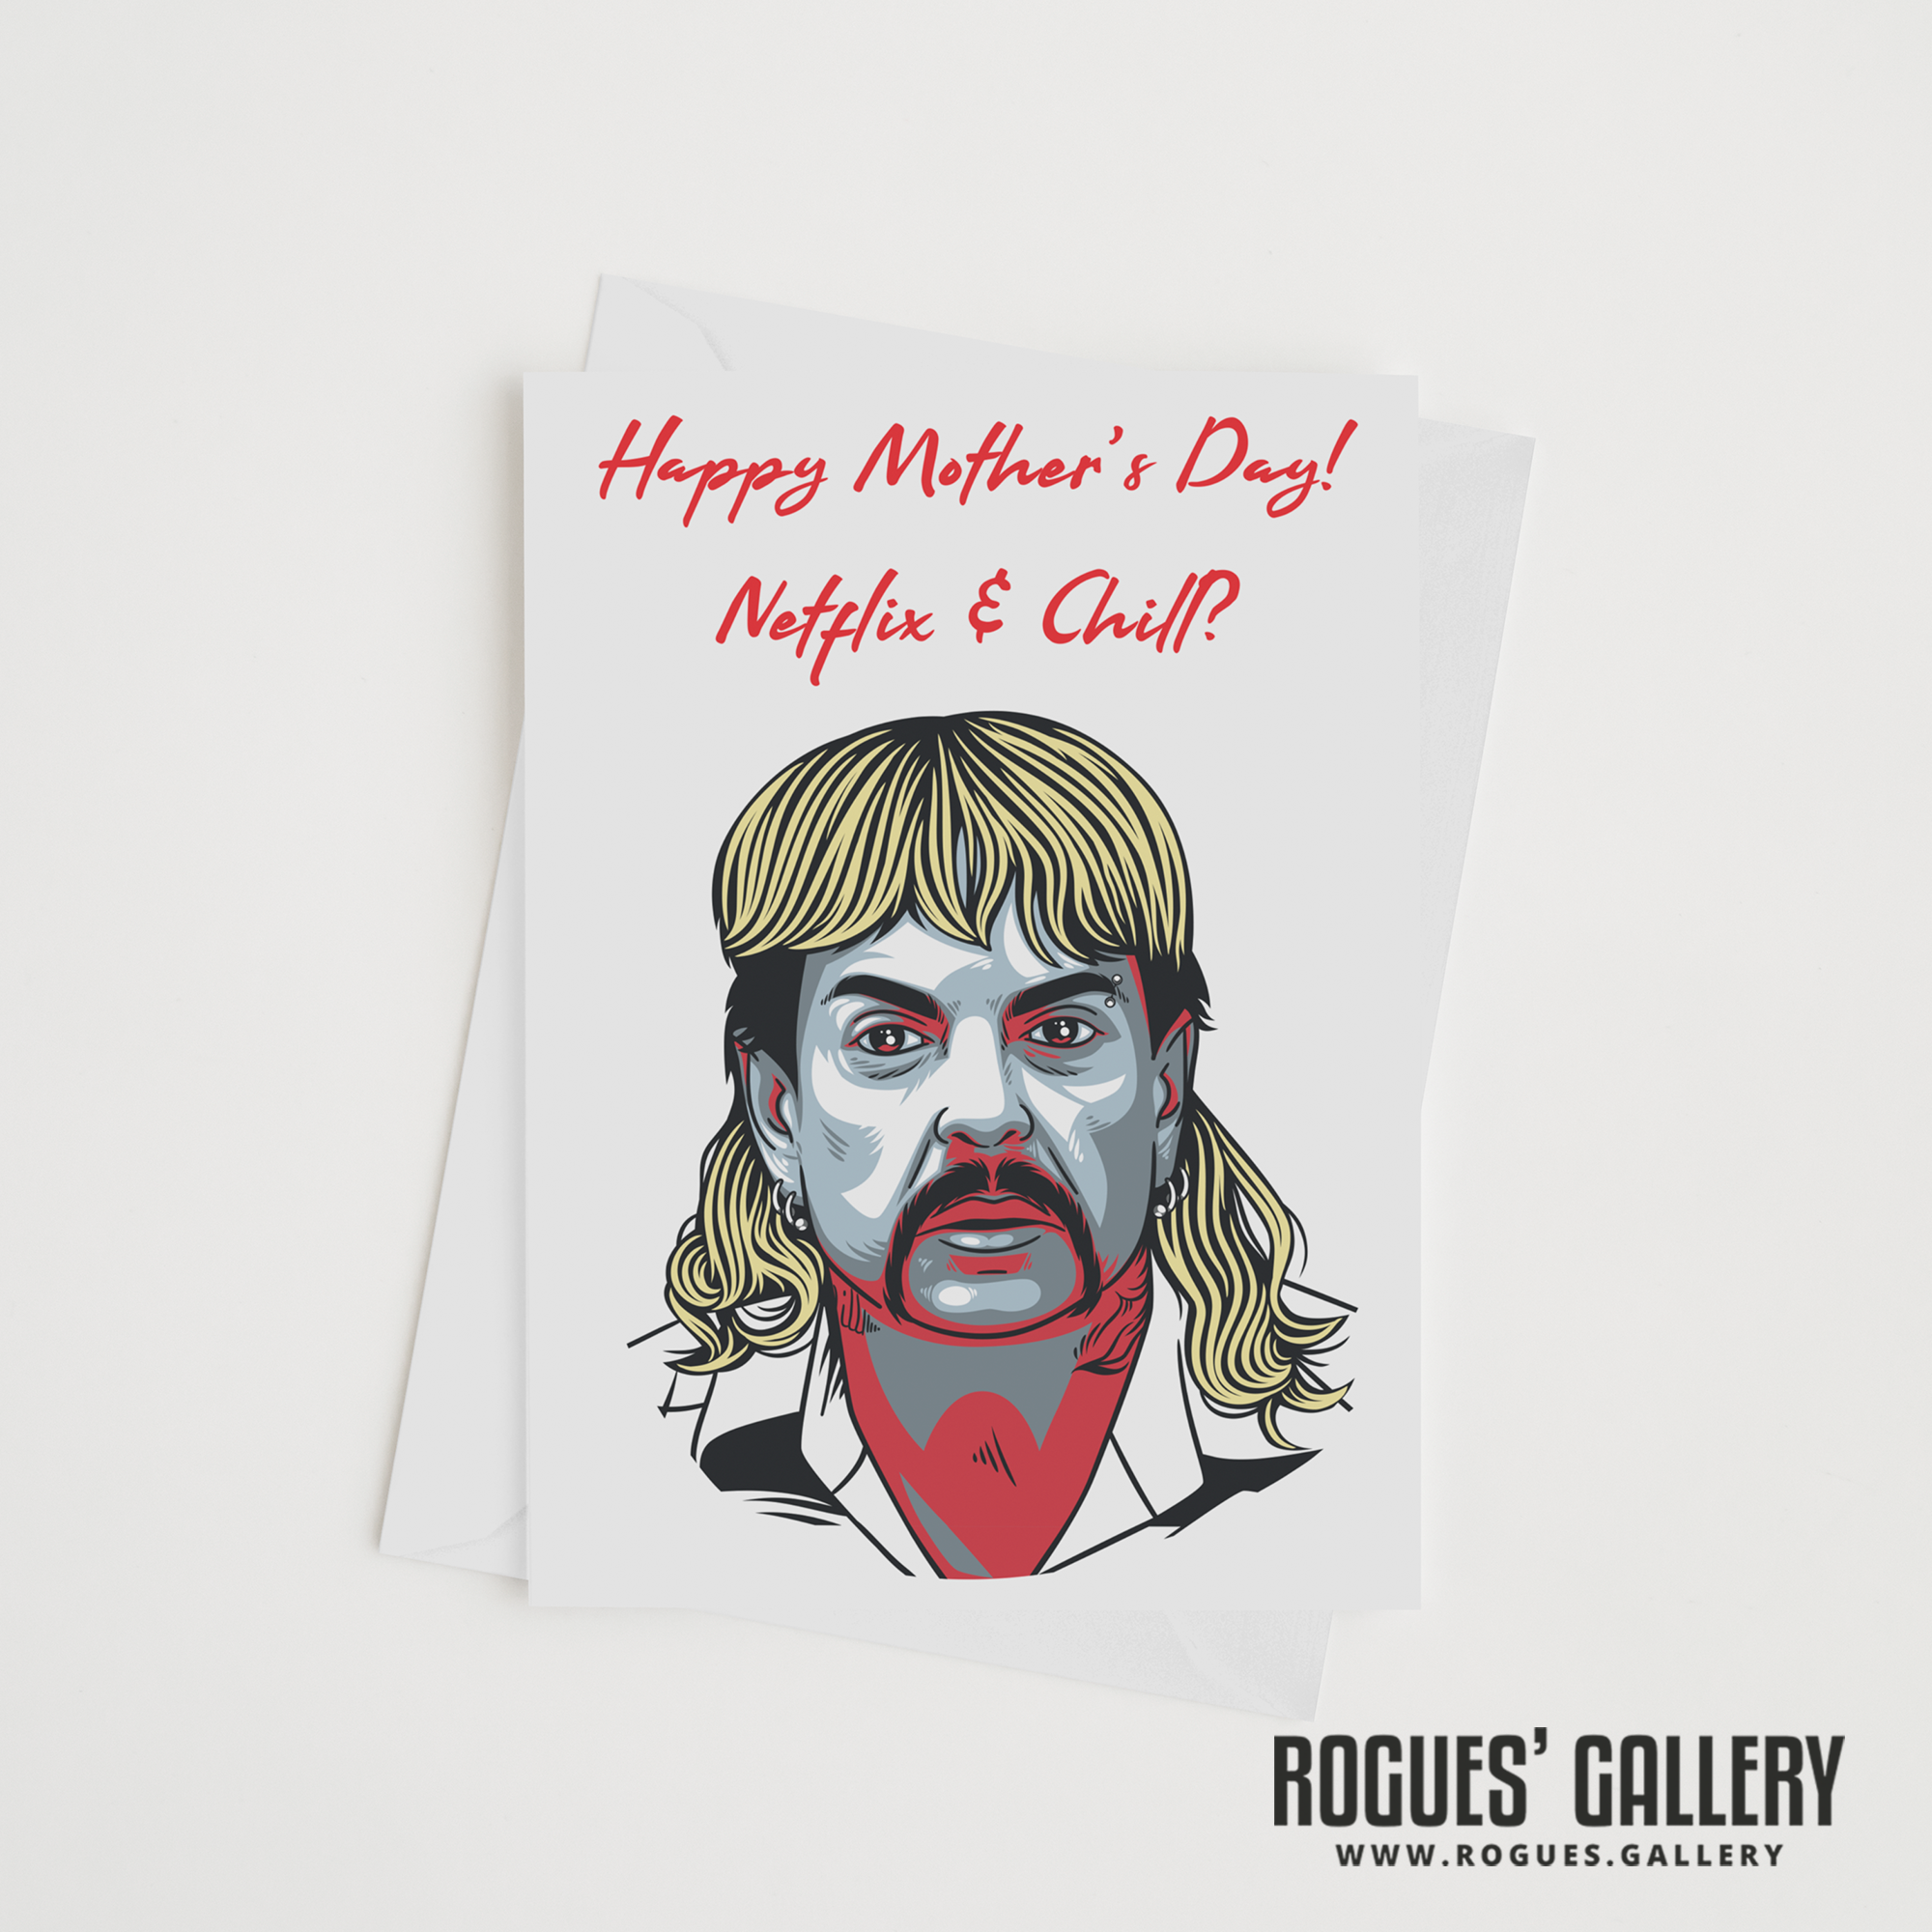 The Tiger King Joe Exotic Zoo Mother's Day card Netflix